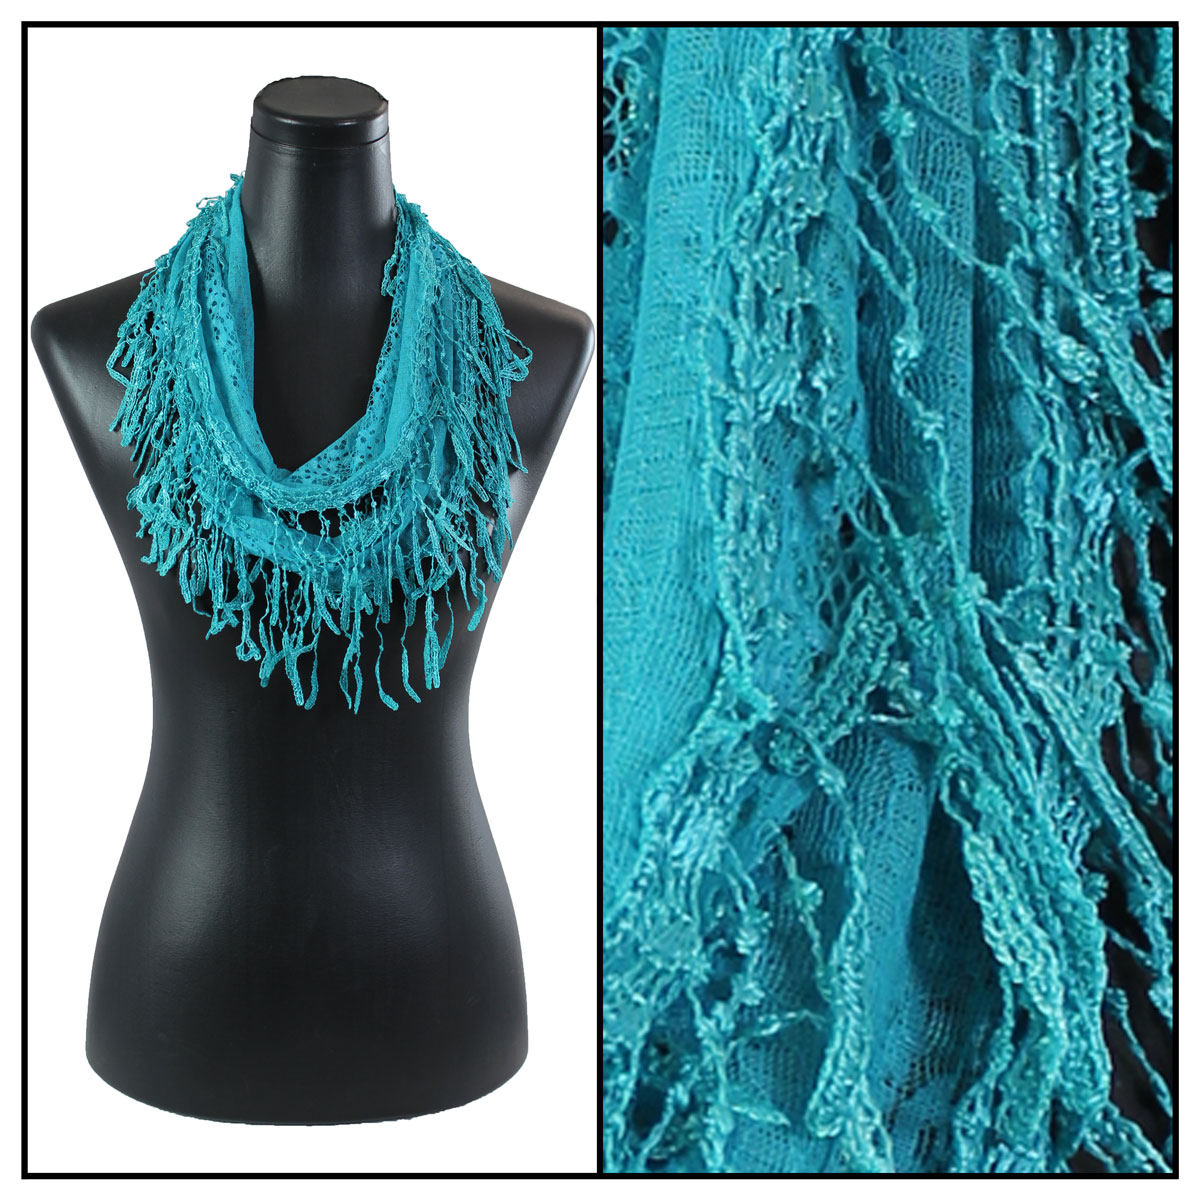 7777 - Victorian Lace Infinity Scarves Hunter Green - 